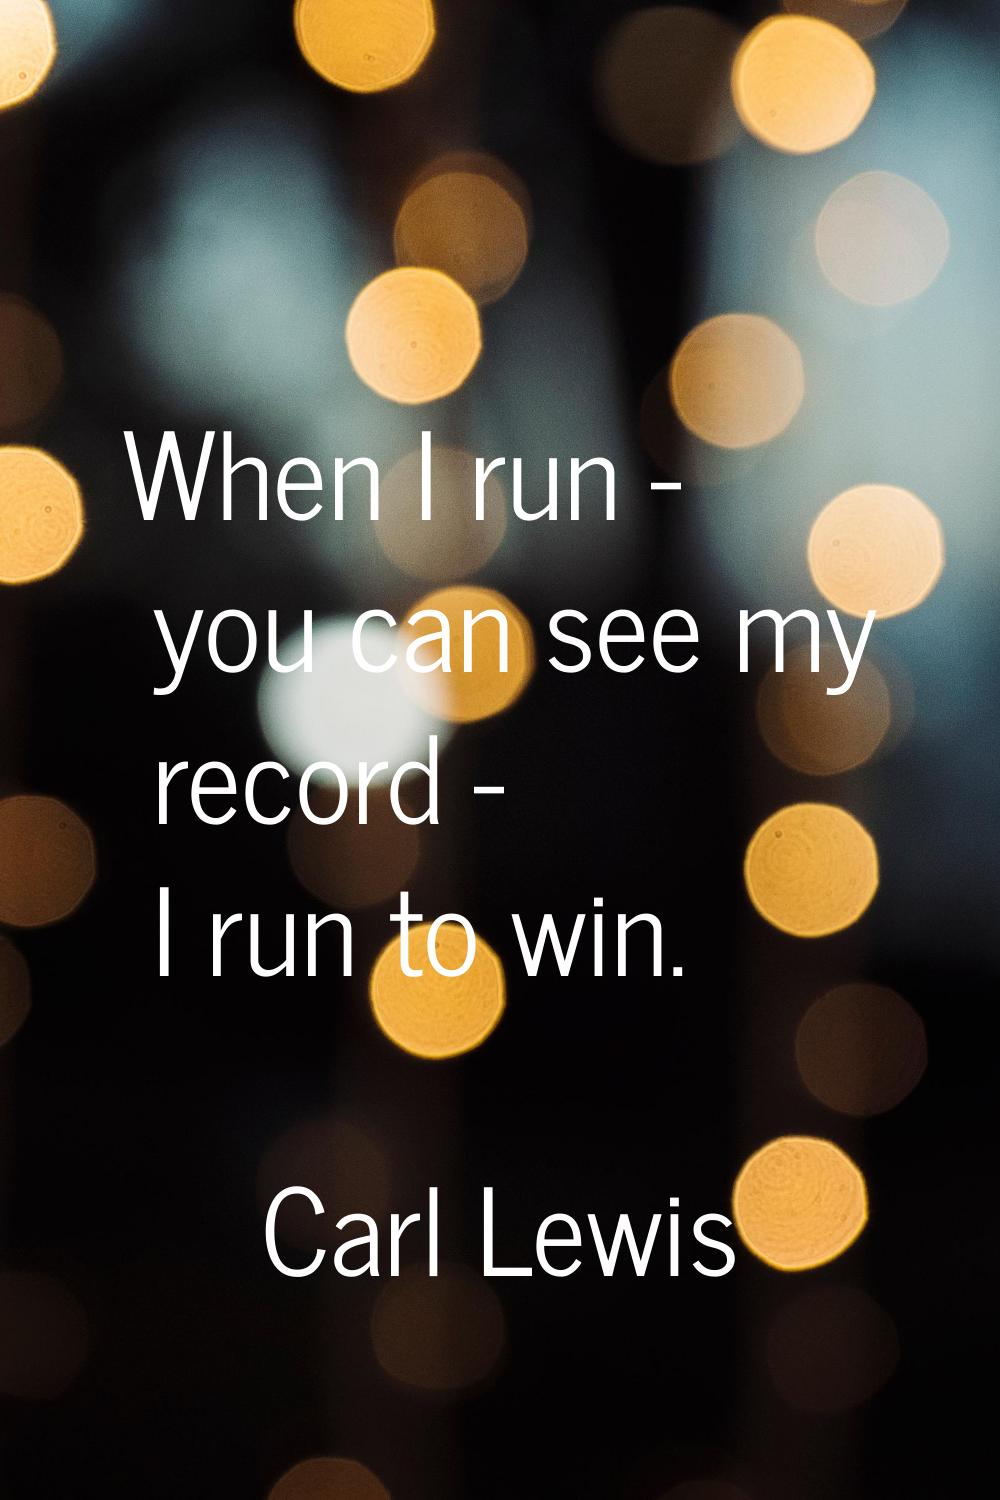 When I run - you can see my record - I run to win.